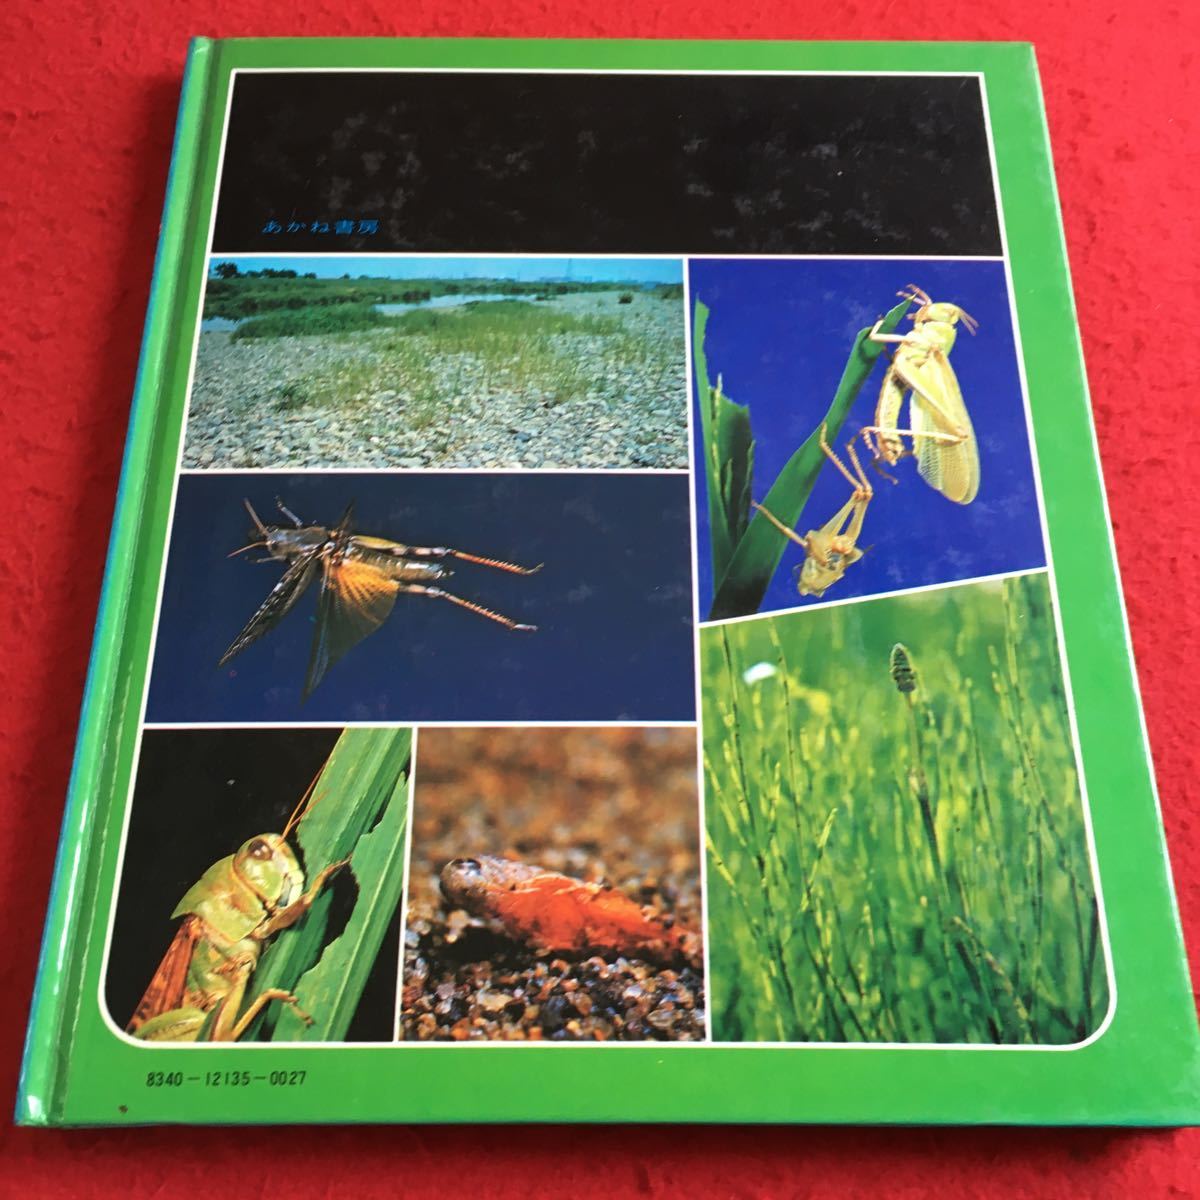 Y17-192 science. album tonneau samabata Sato have .* photograph small rice field britain .* writing ... bookstore 1981 year issue raw . company heaven . tweet insect .. world large group etc. 